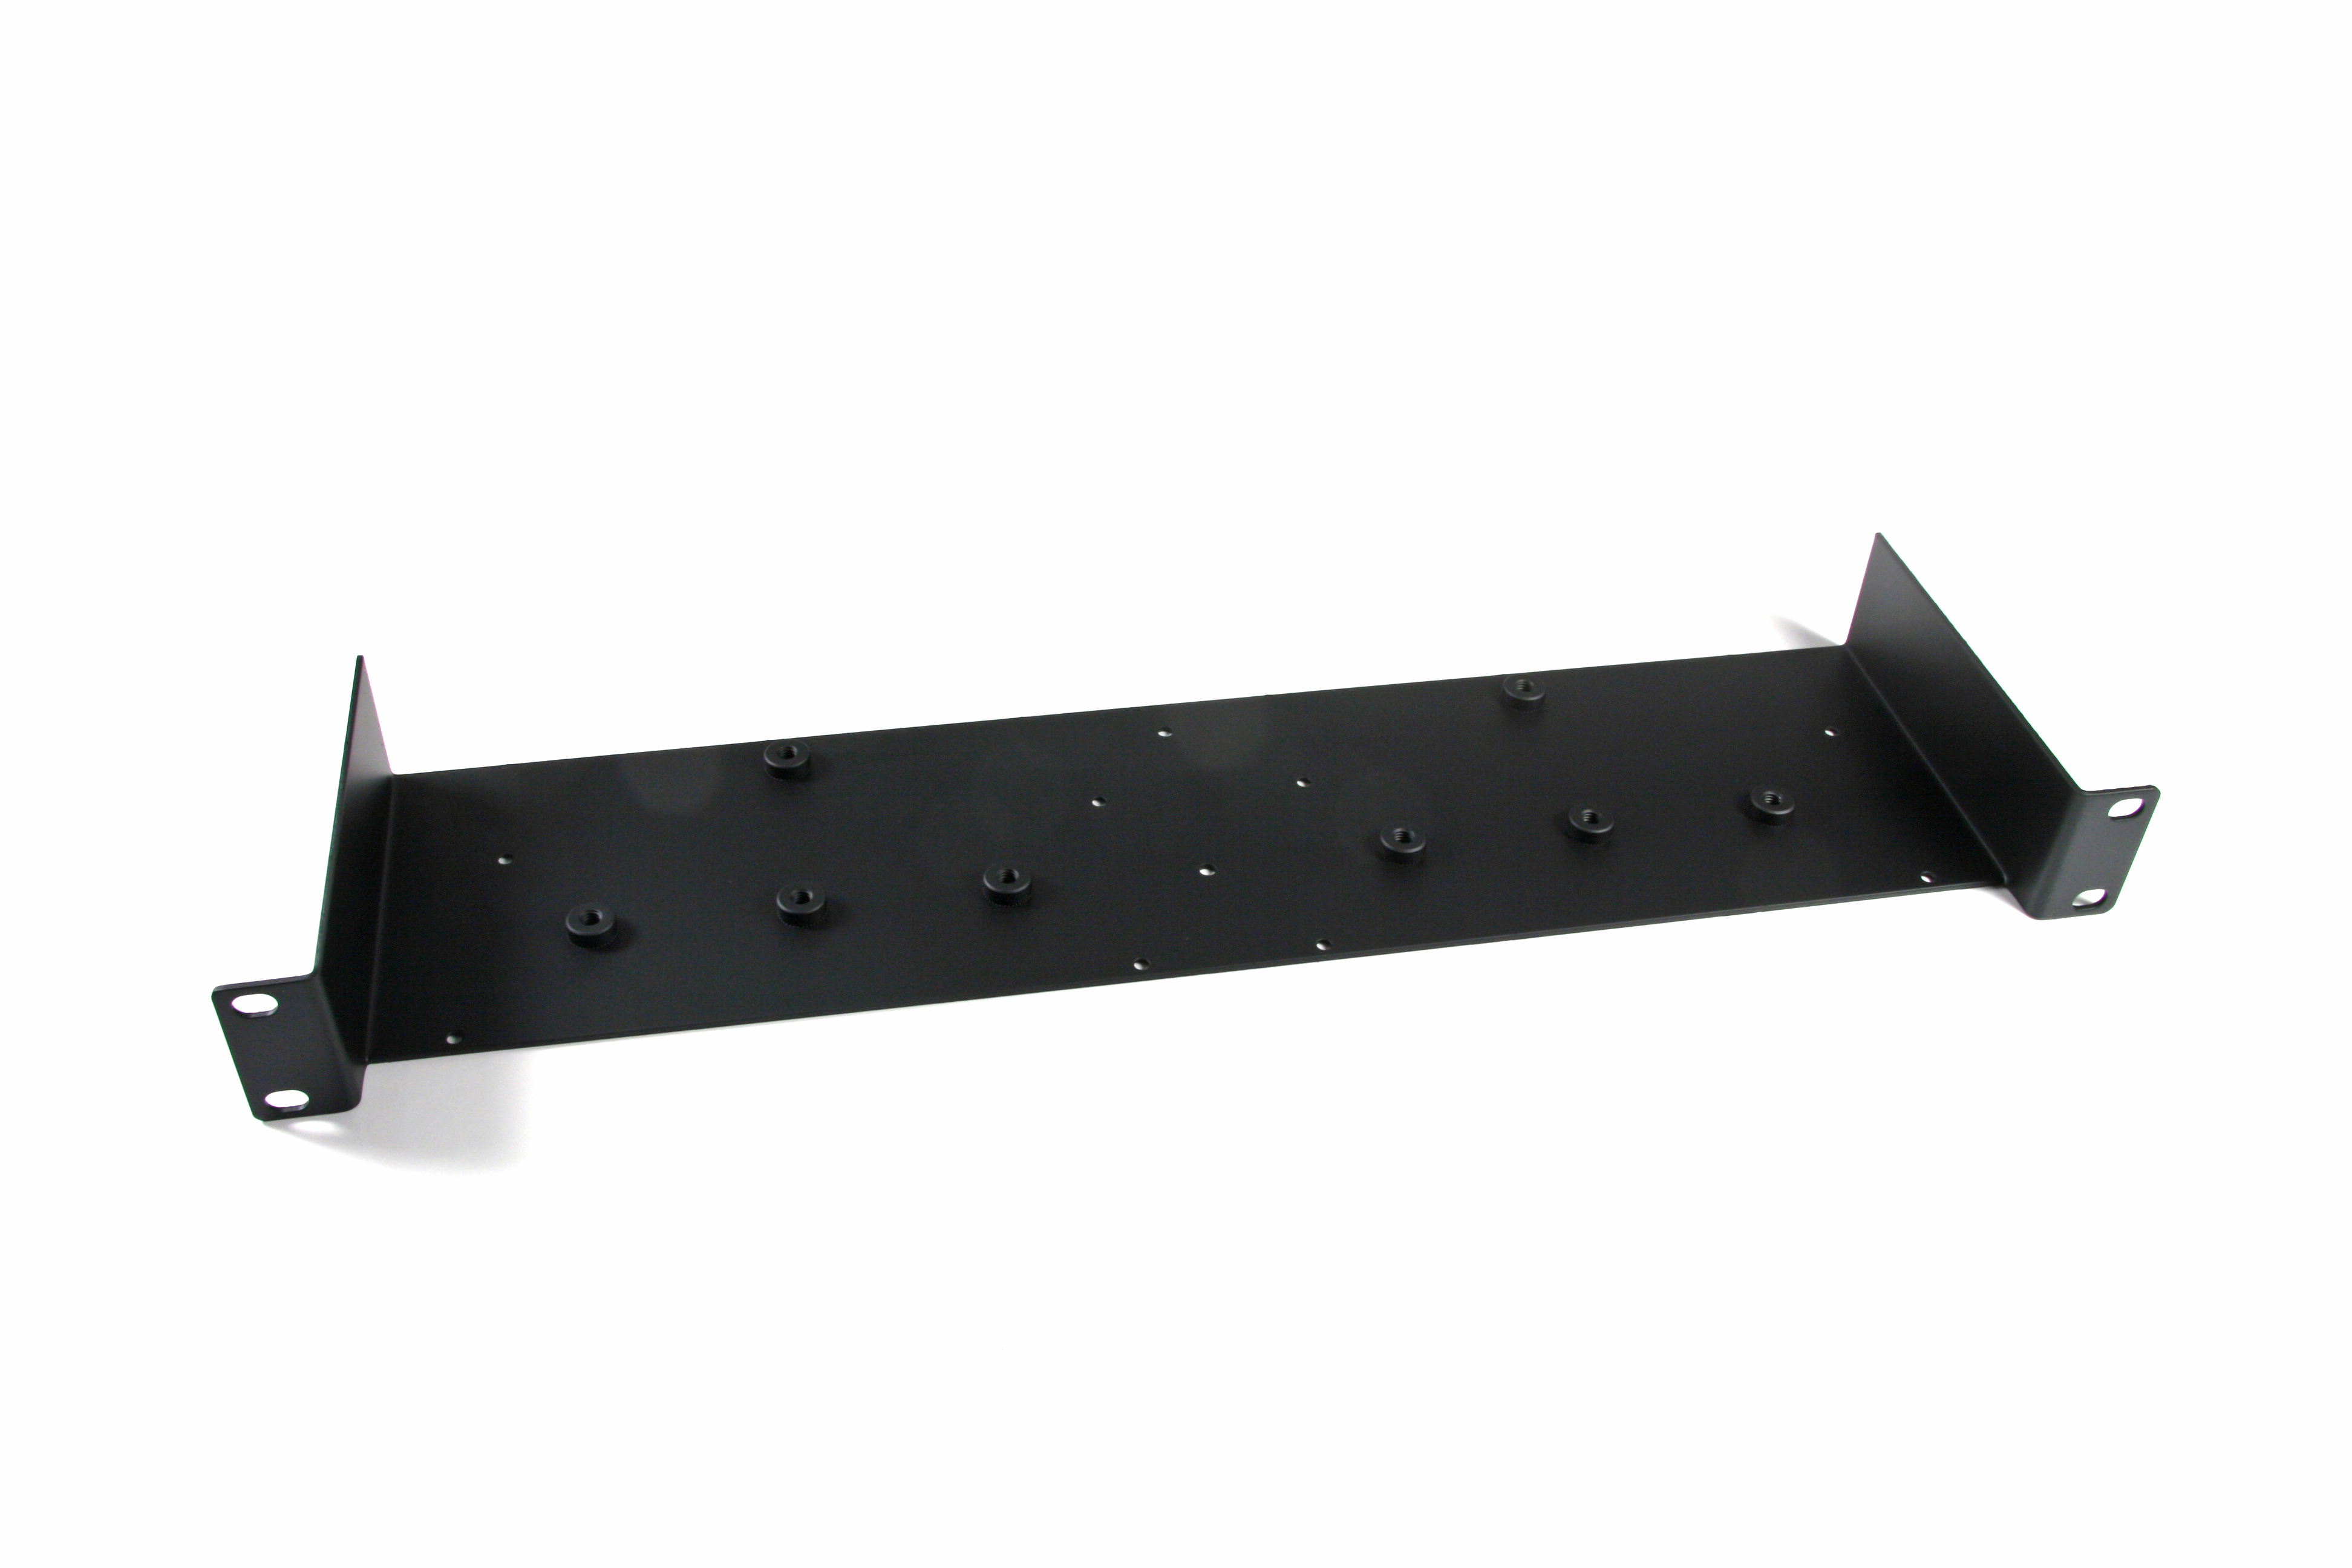 19in Rack tray for two receivers for S4.14 Series